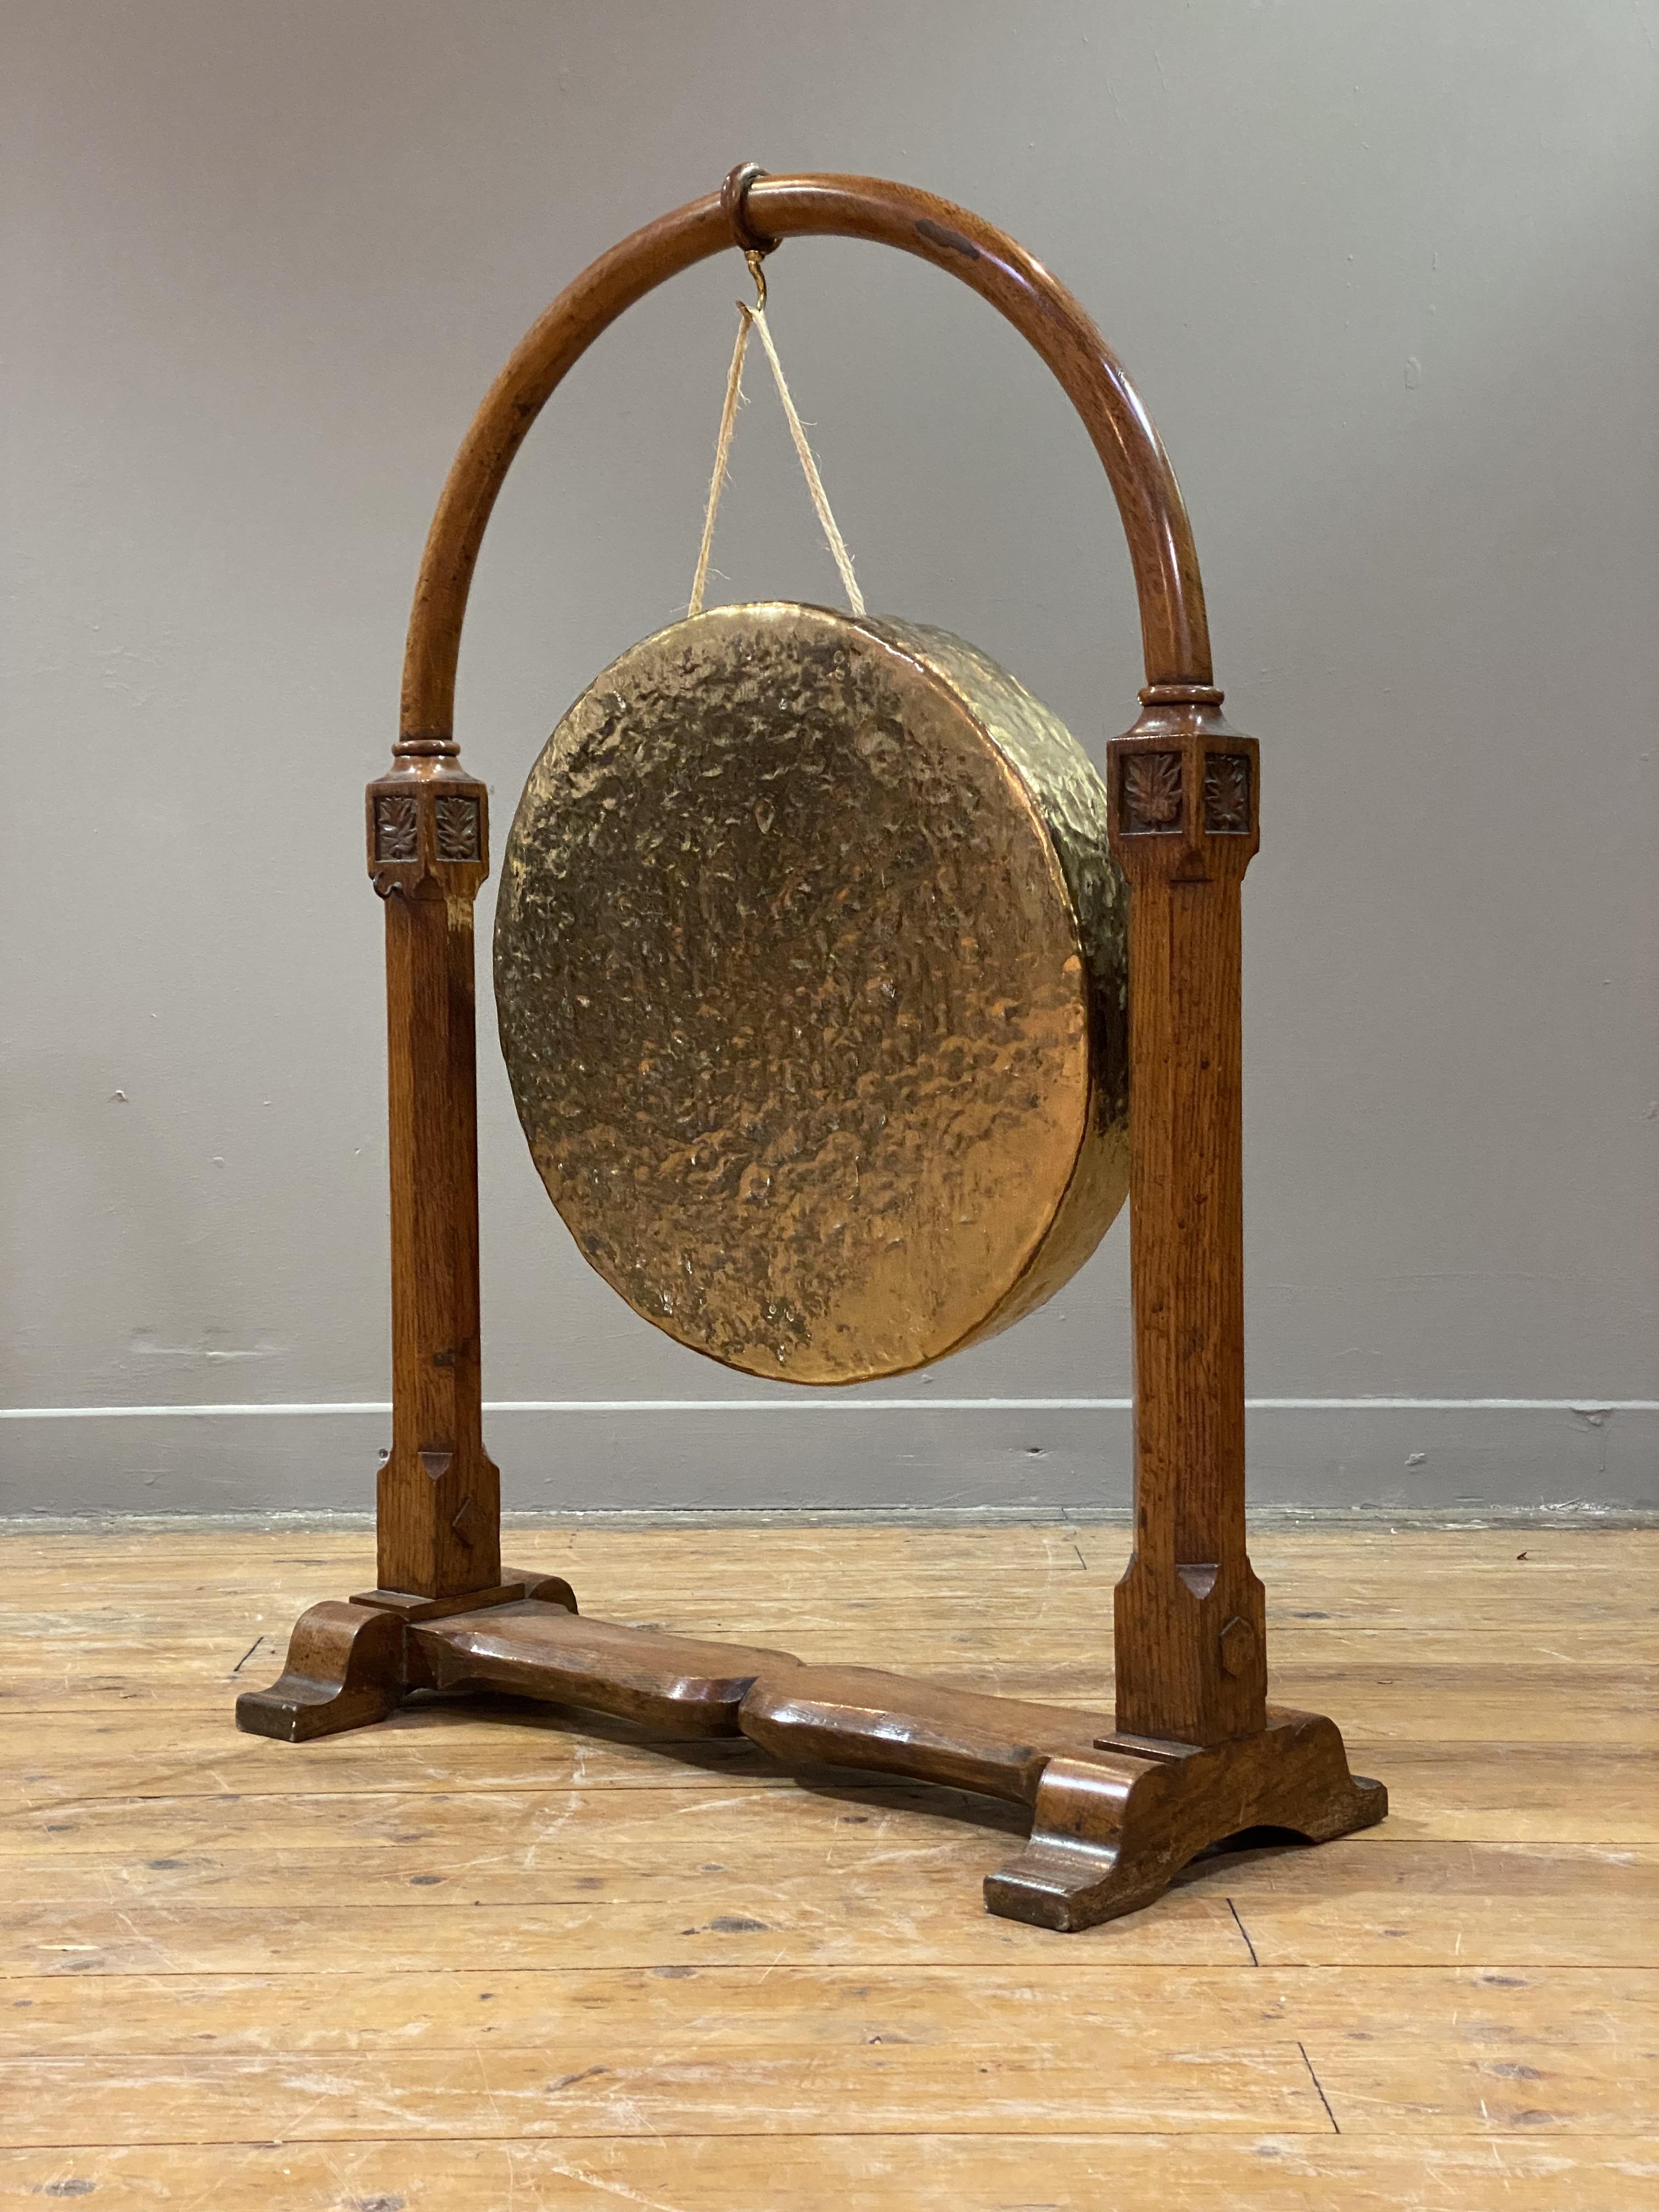 A Victorian floor standing dinner gong, the hammered brass gong hanging from an oak frame with